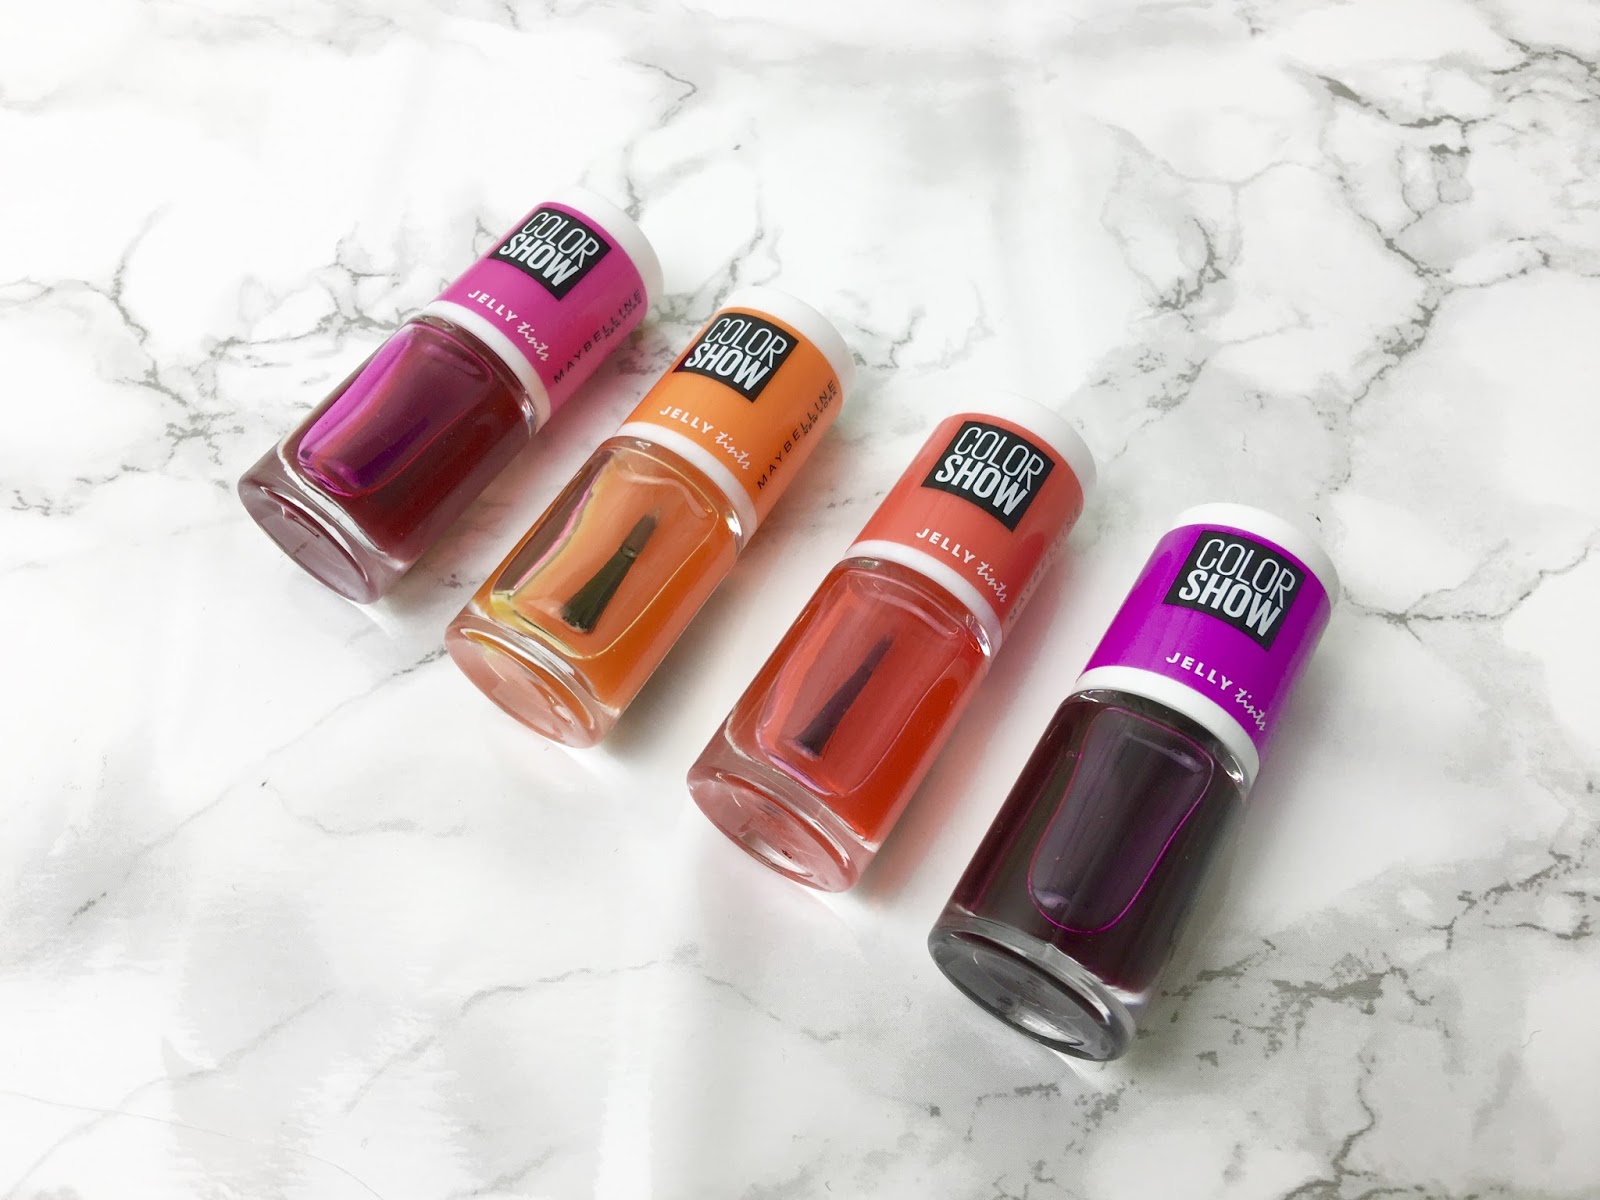 Maybelline Color Show Nail Polish Shredded - wide 5